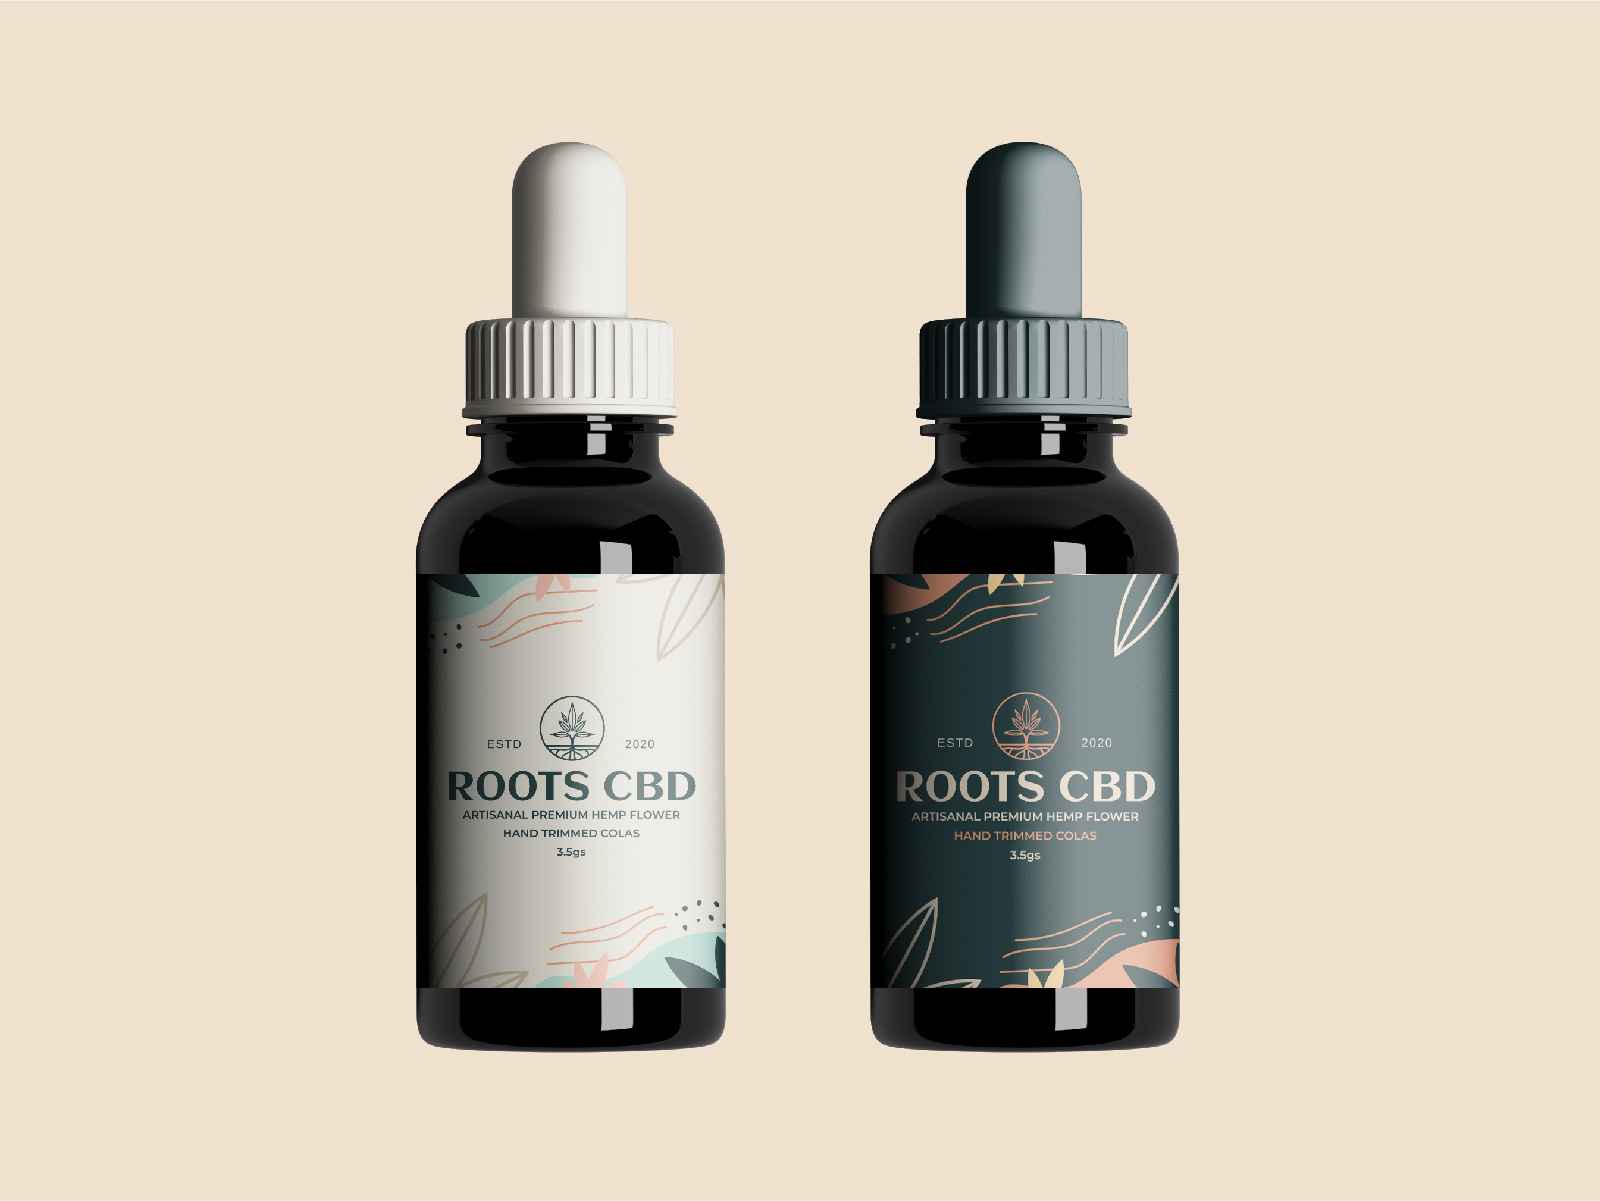 Roots CBD Branding and Packaging Design